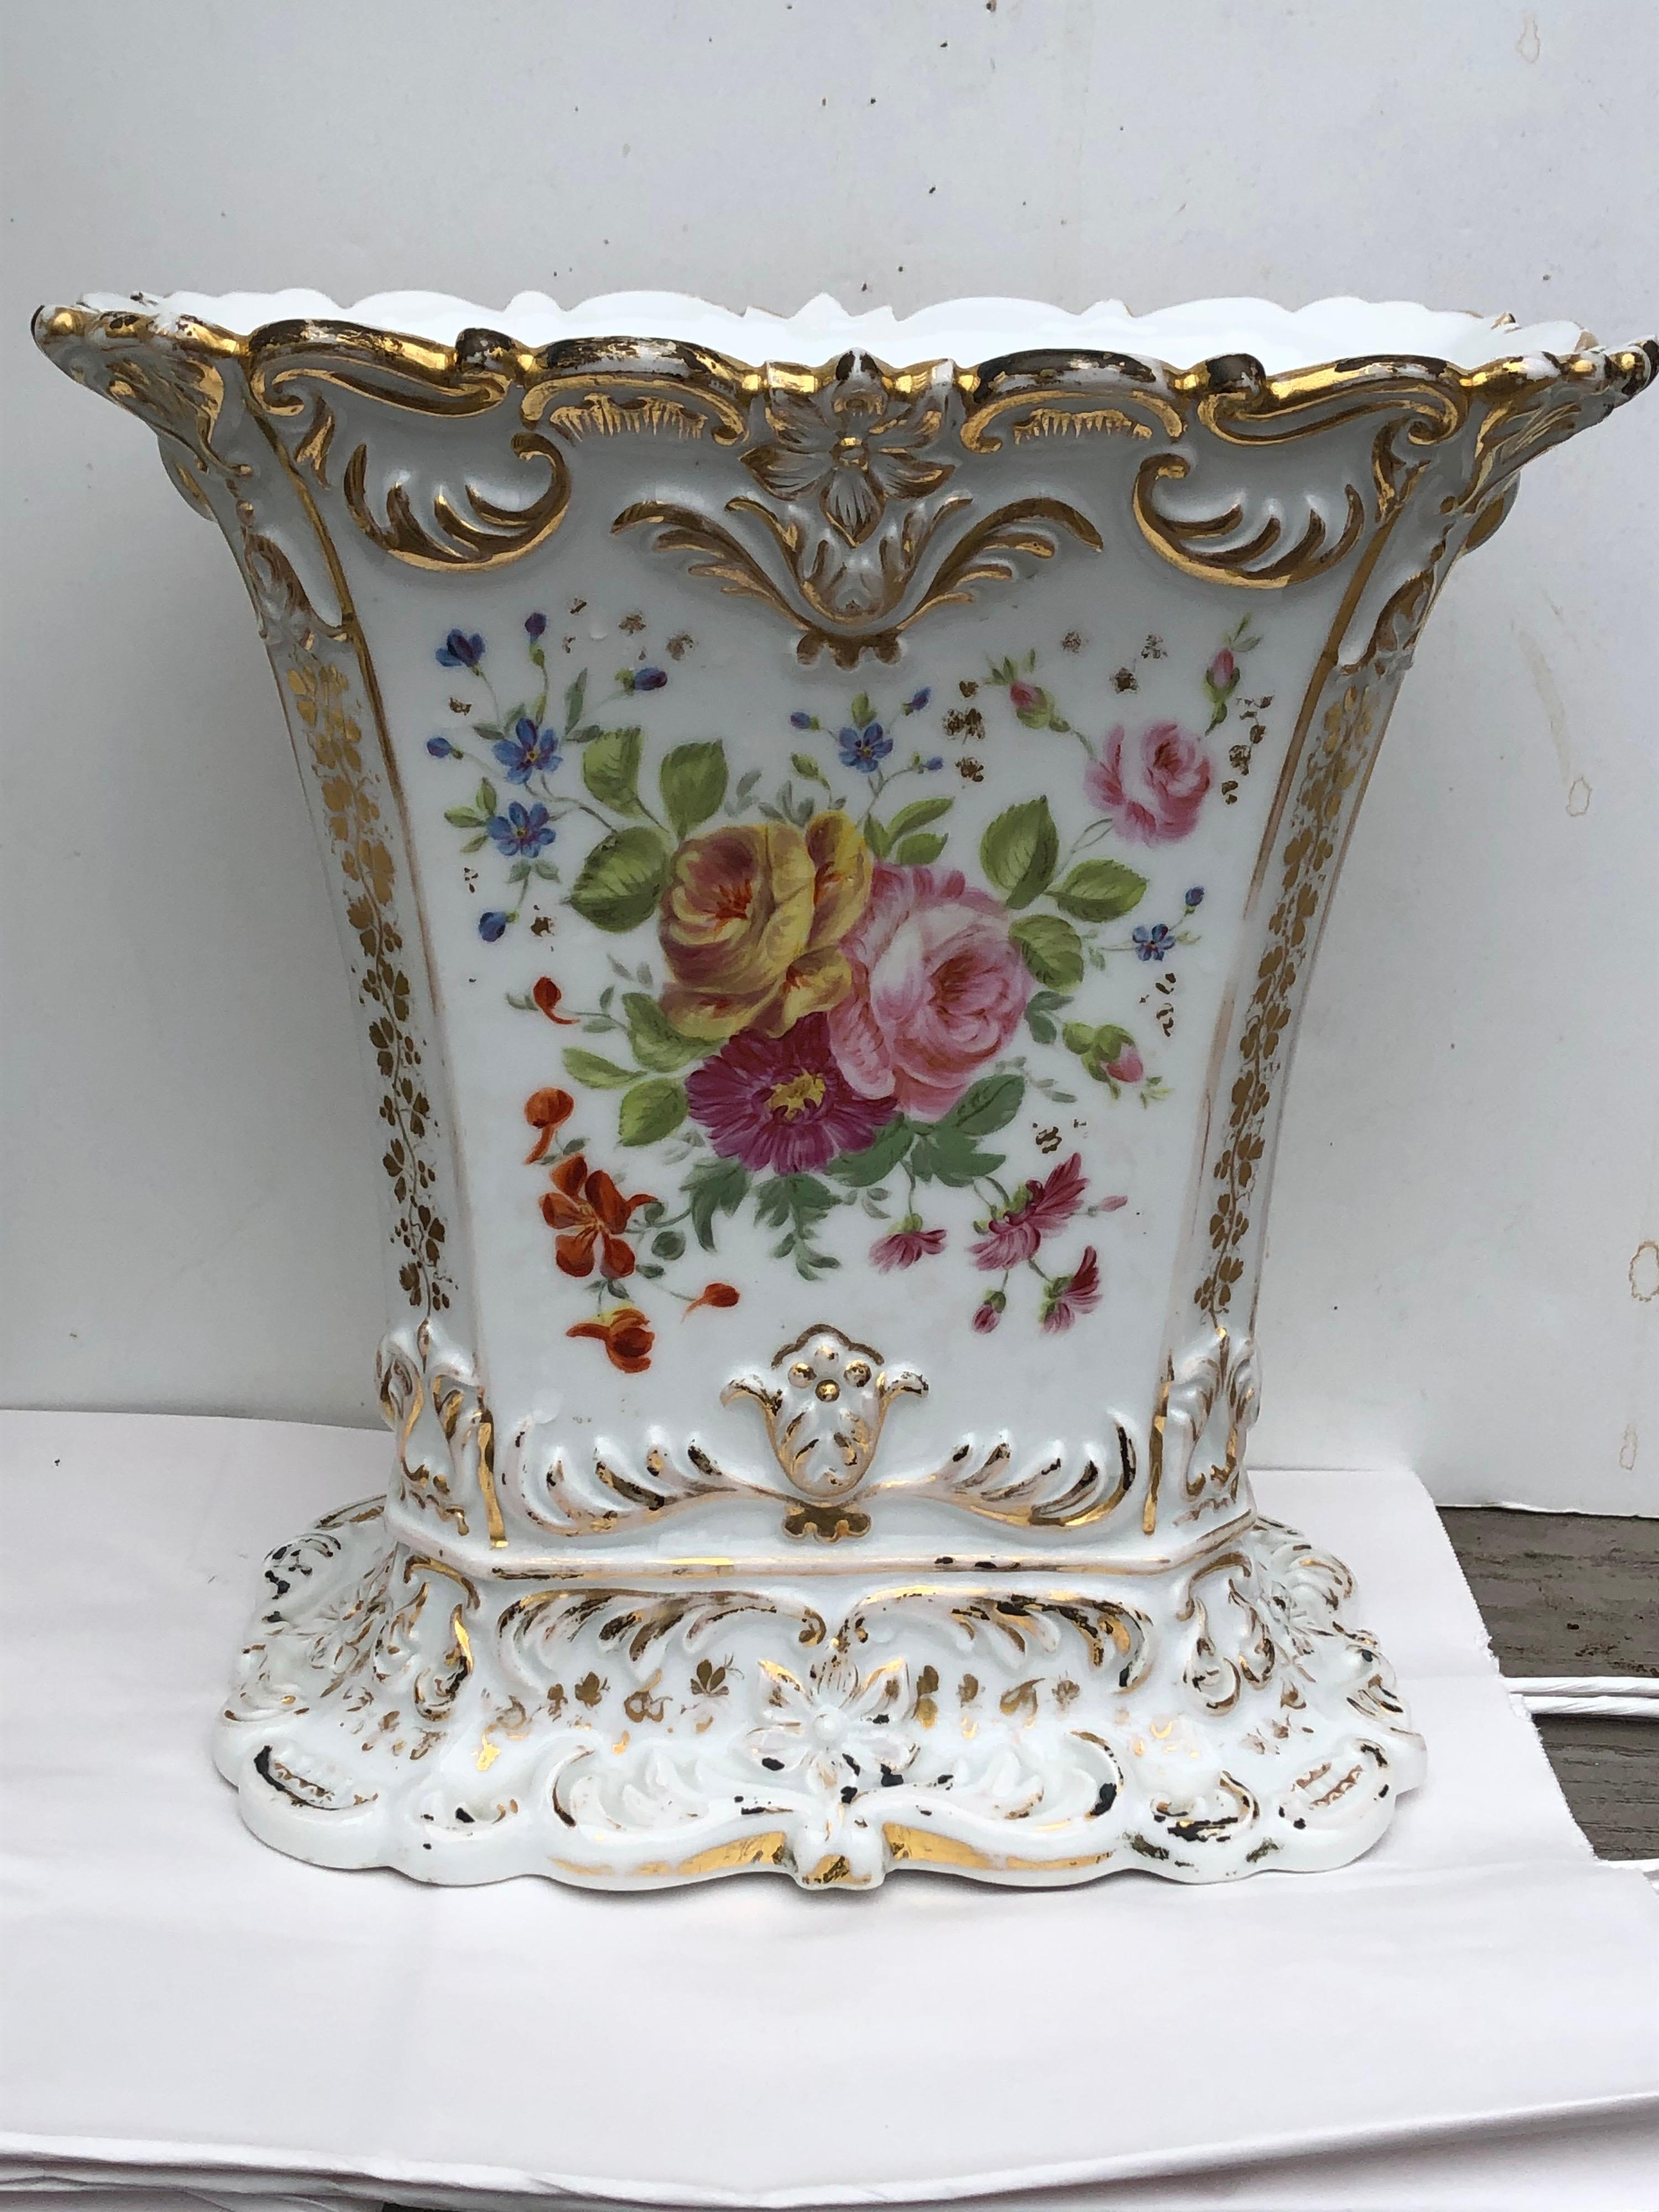 Very large late 19th Paris porcelain rectangular spill vase with gilt details and floral decoration. Elegant size. In good condition. Minor firing crack. There is a star shaped crack to the underside but it does not extend to the interior.